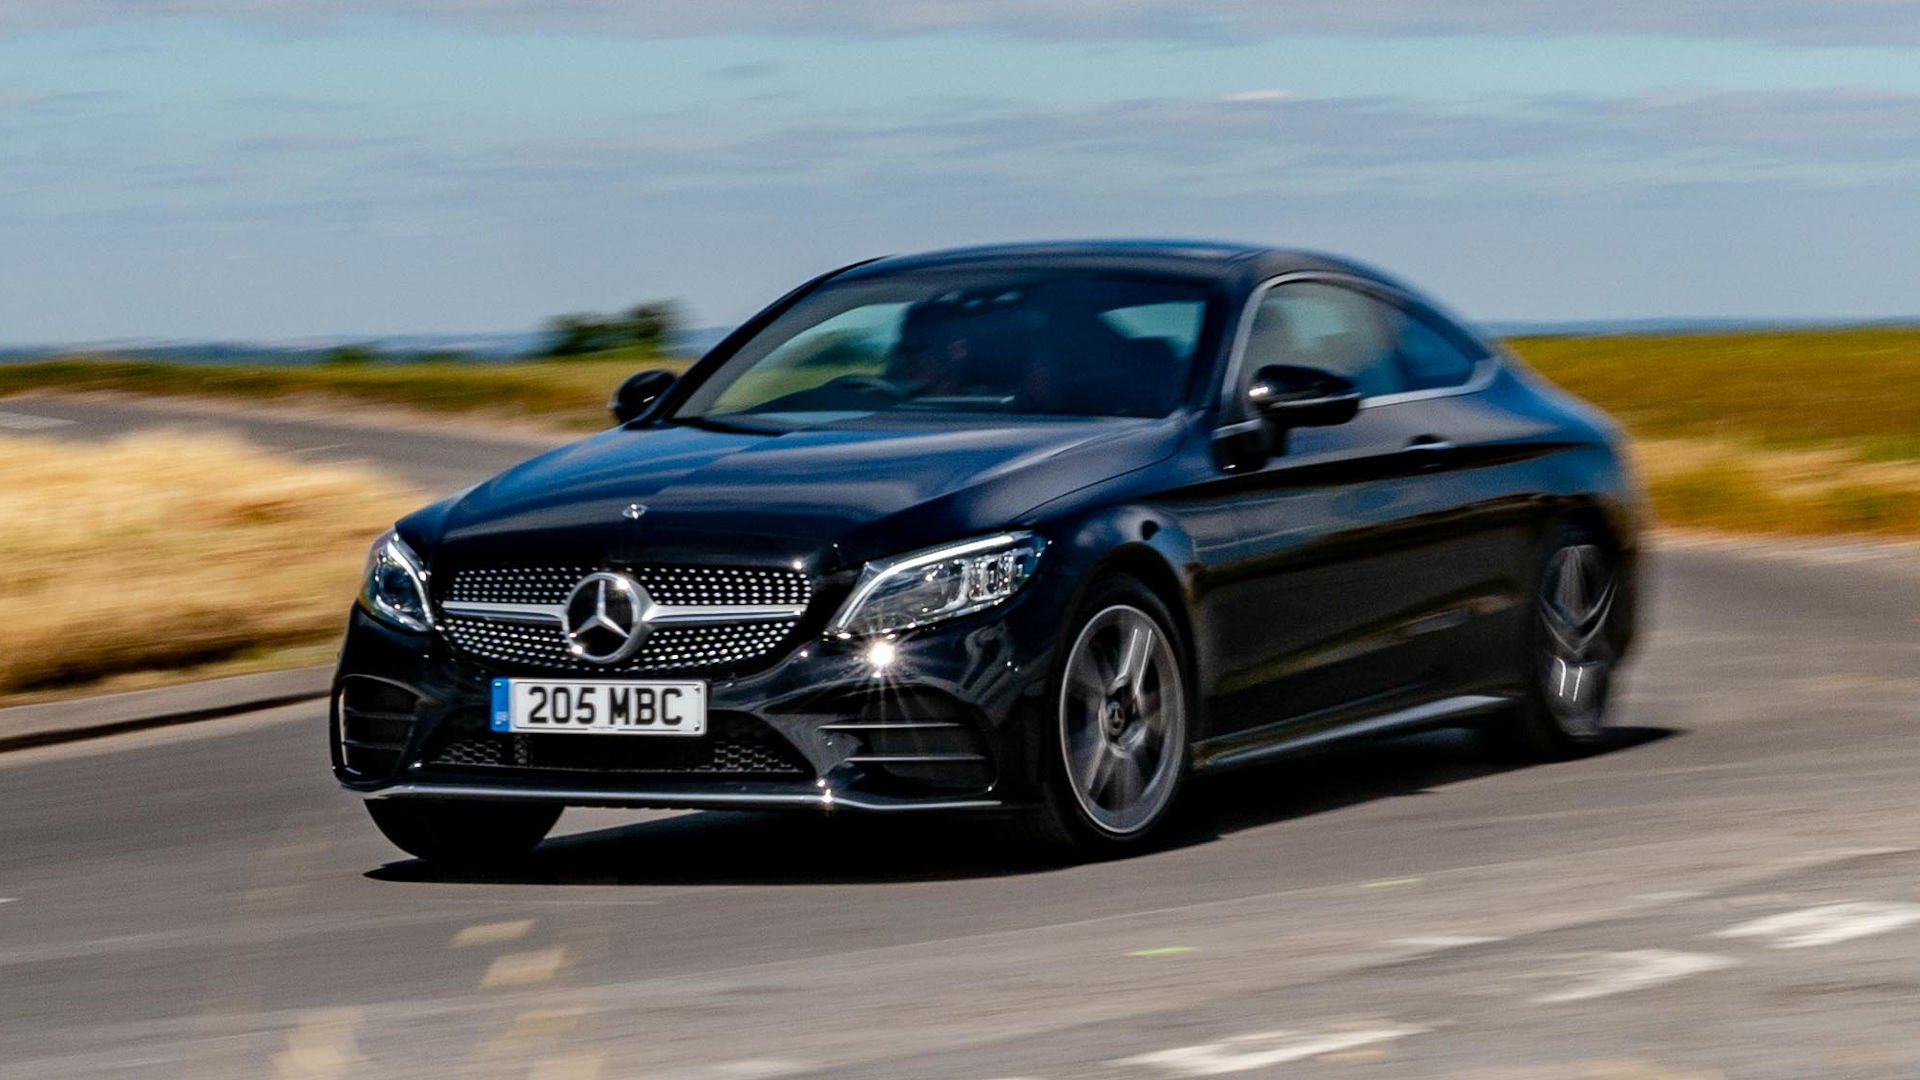 Mercedes-Benz C Class Coupe Cars For Sale | AutoTrader UK